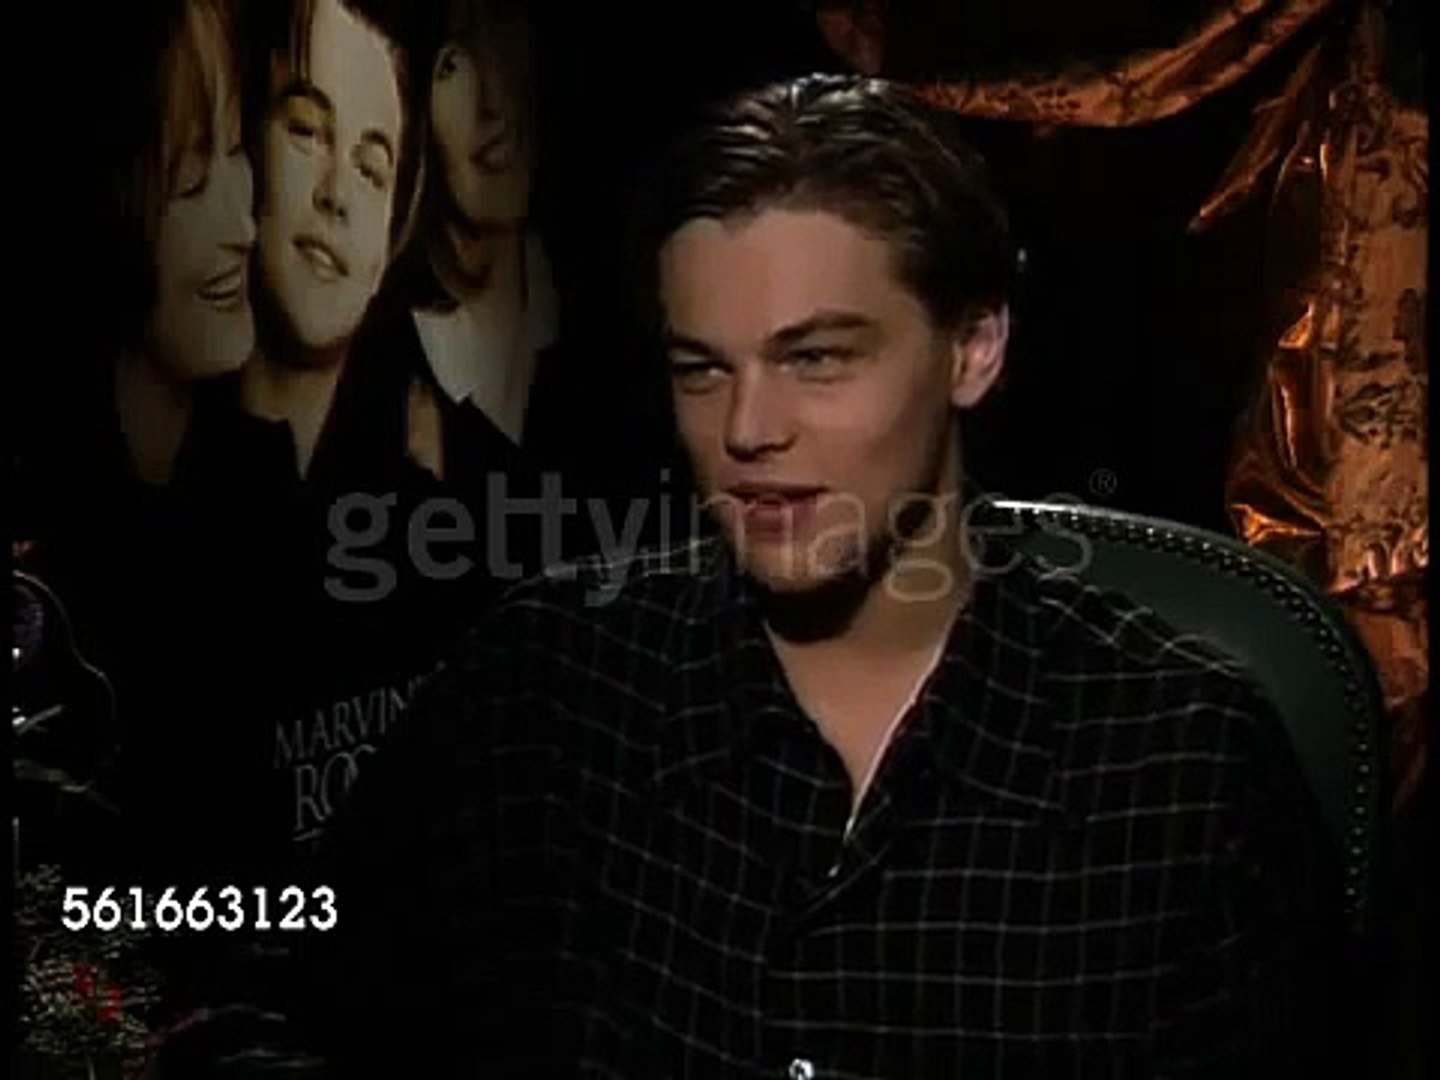 Leonardo DiCaprio about Marvins Room interview 1996 - video Dailymotion